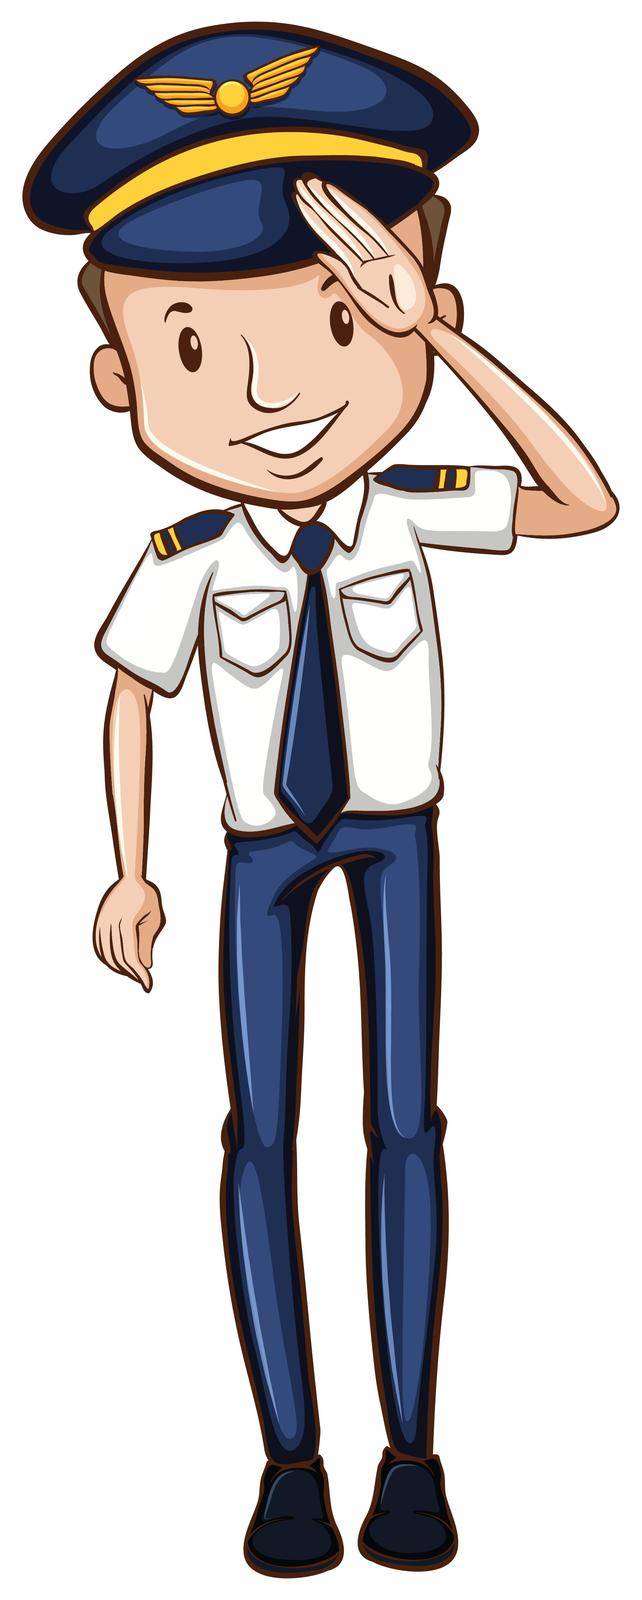 Illustration of a sketch of a happy pilot on a white background